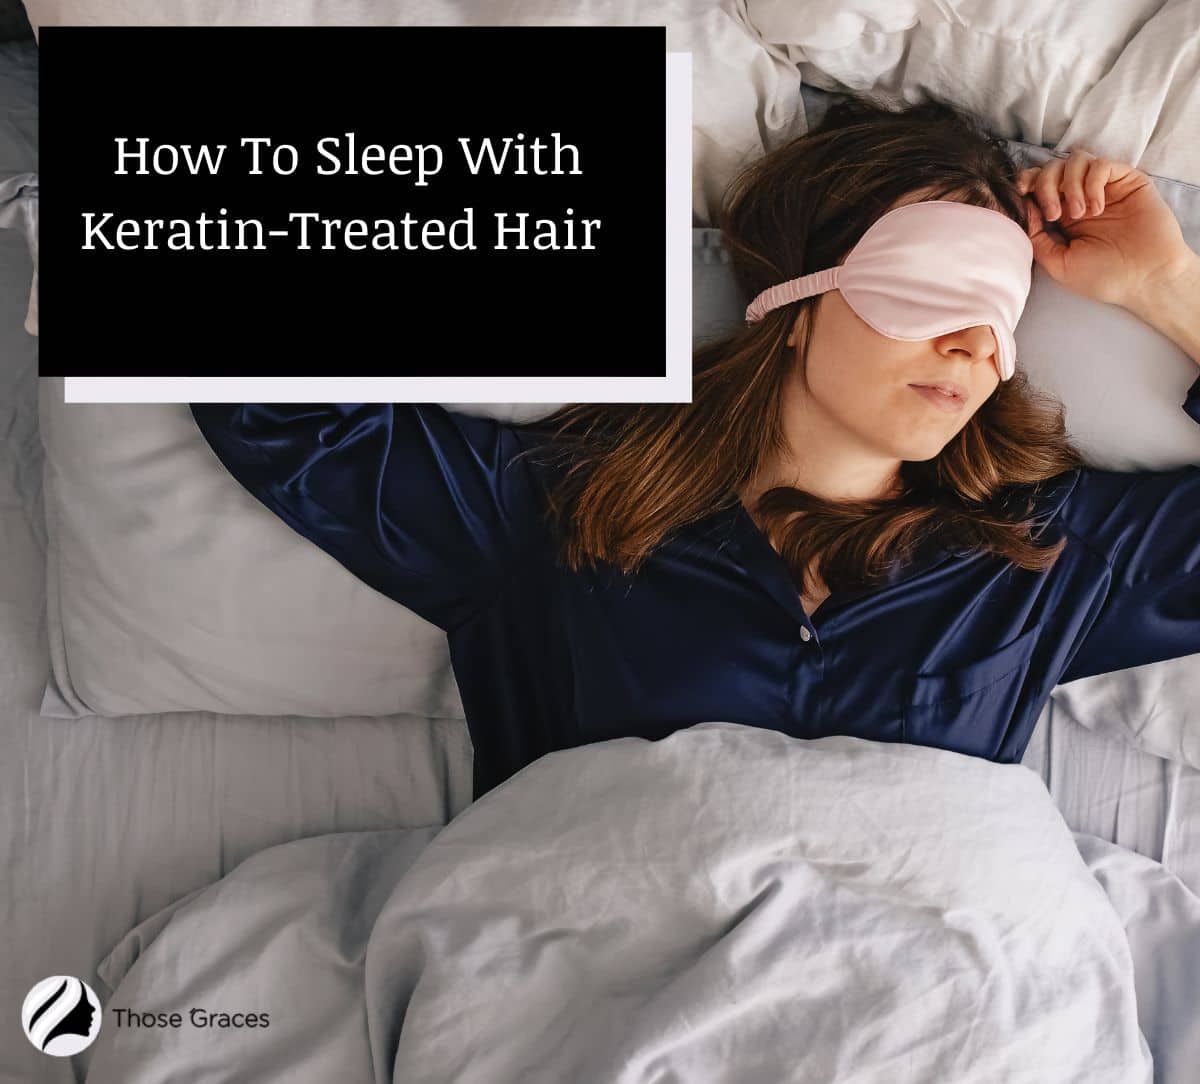 lady showing How To Sleep With Keratin-Treated Hair